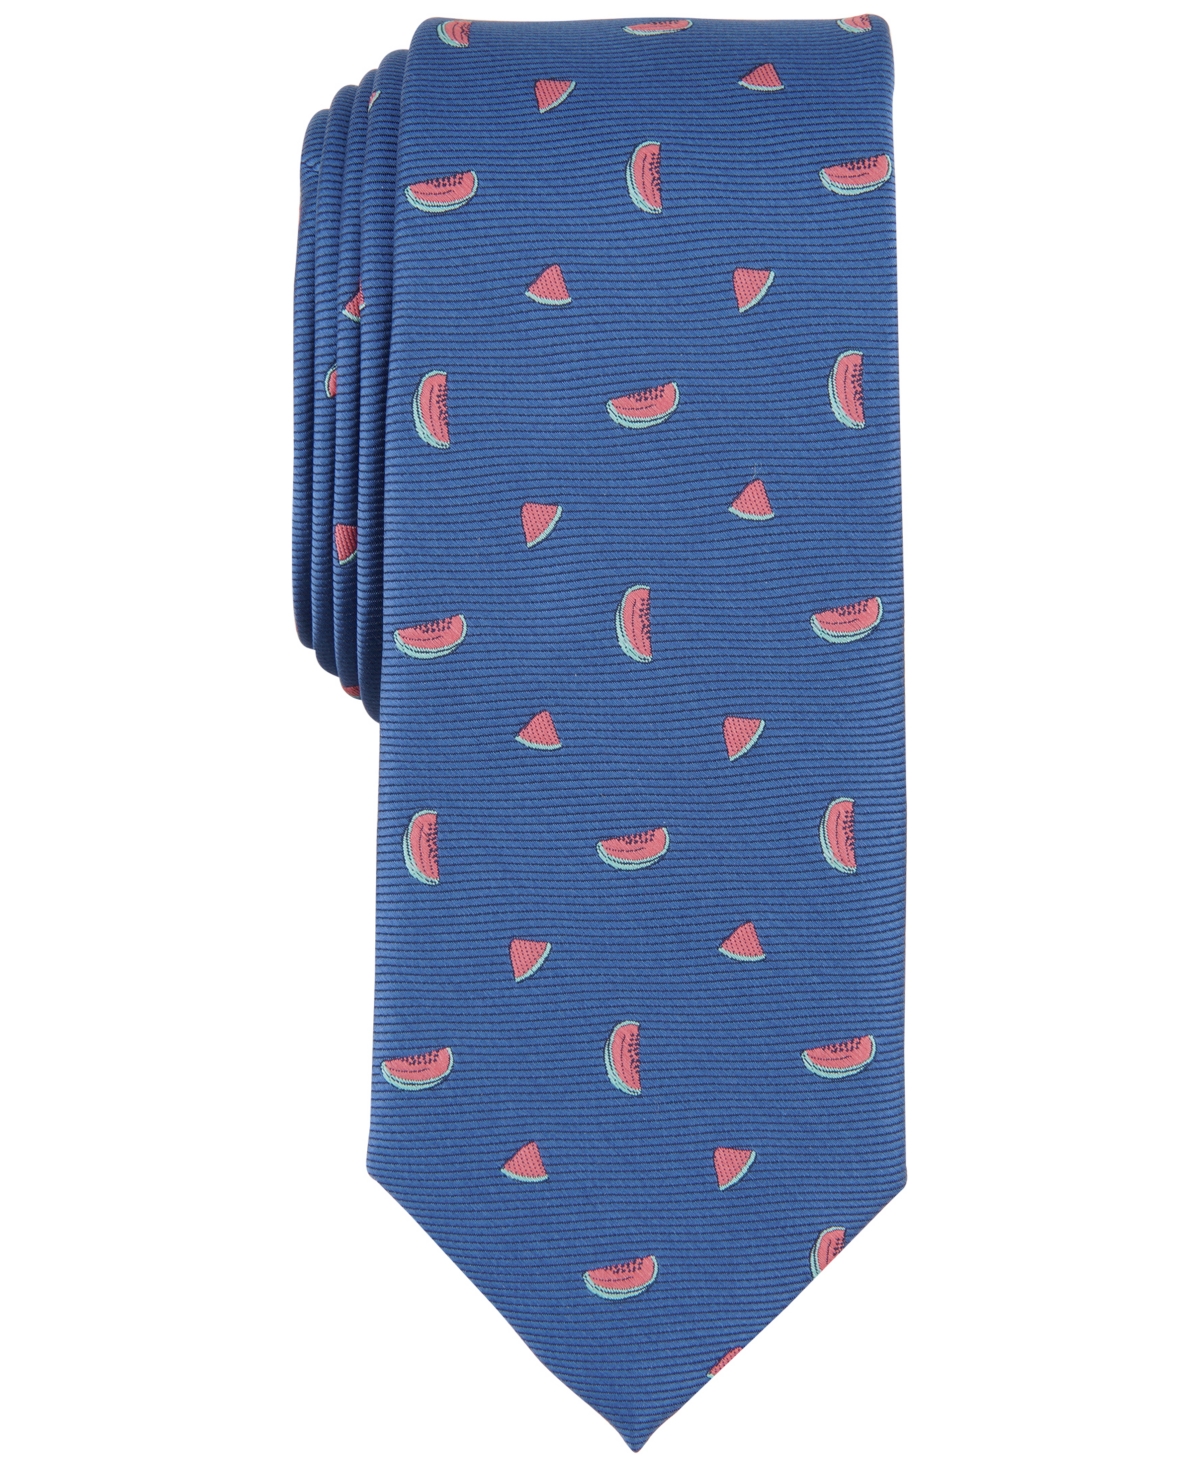 Men's Hilldale Watermelon Graphic Tie, Created for Macy's - Blue